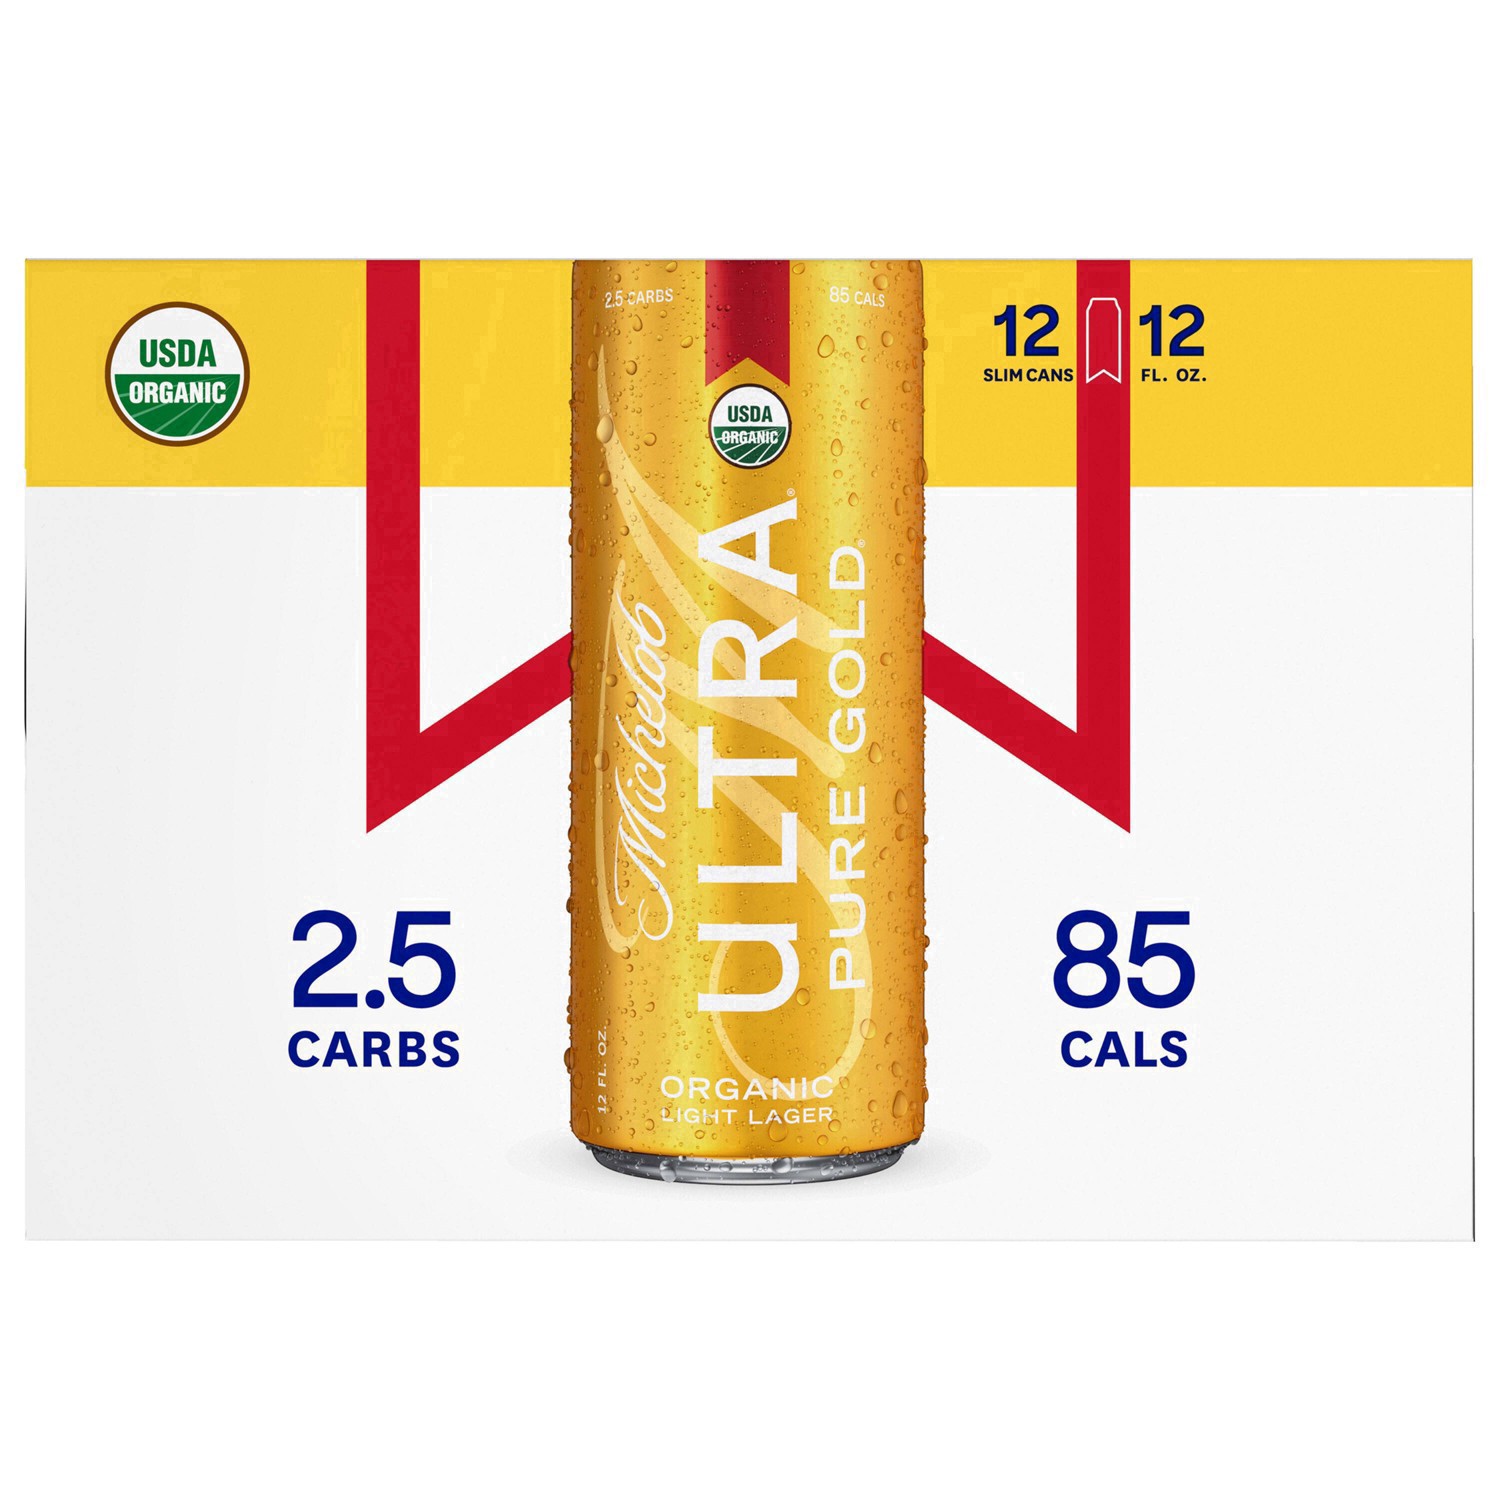 slide 12 of 134, Michelob Ultra Pure Gold Organic Light Lager Beer, 12-12 fl. oz. Cans, 12 ct; 12 oz